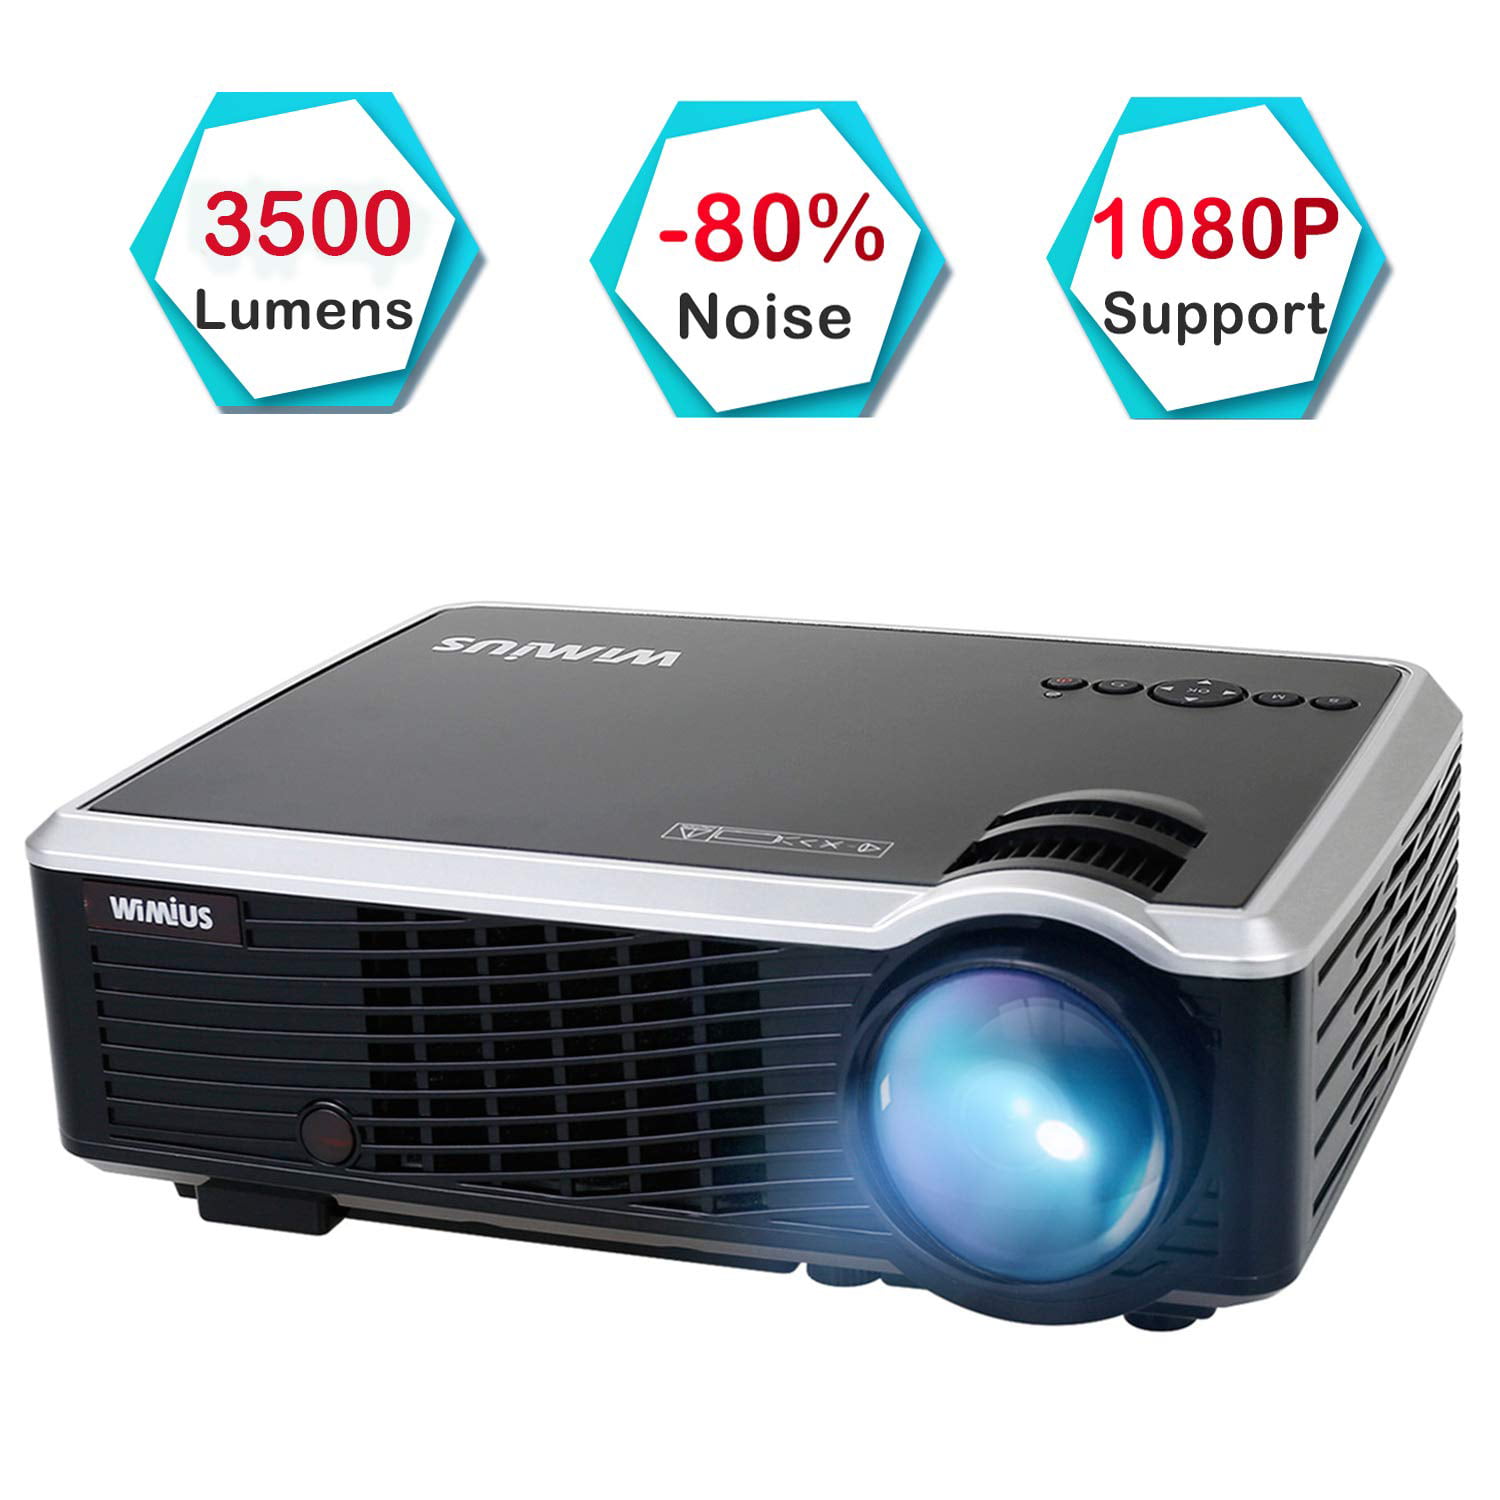 Projector WiMiUS P20 7200 Lumens LED Projector Native 1920x1080 Video Projector Support 4K Compatible with PC Laptop Chromecast USB Stick Fire TV Stick Smartphones 4D ±50°Keystone Correction Zoom Function